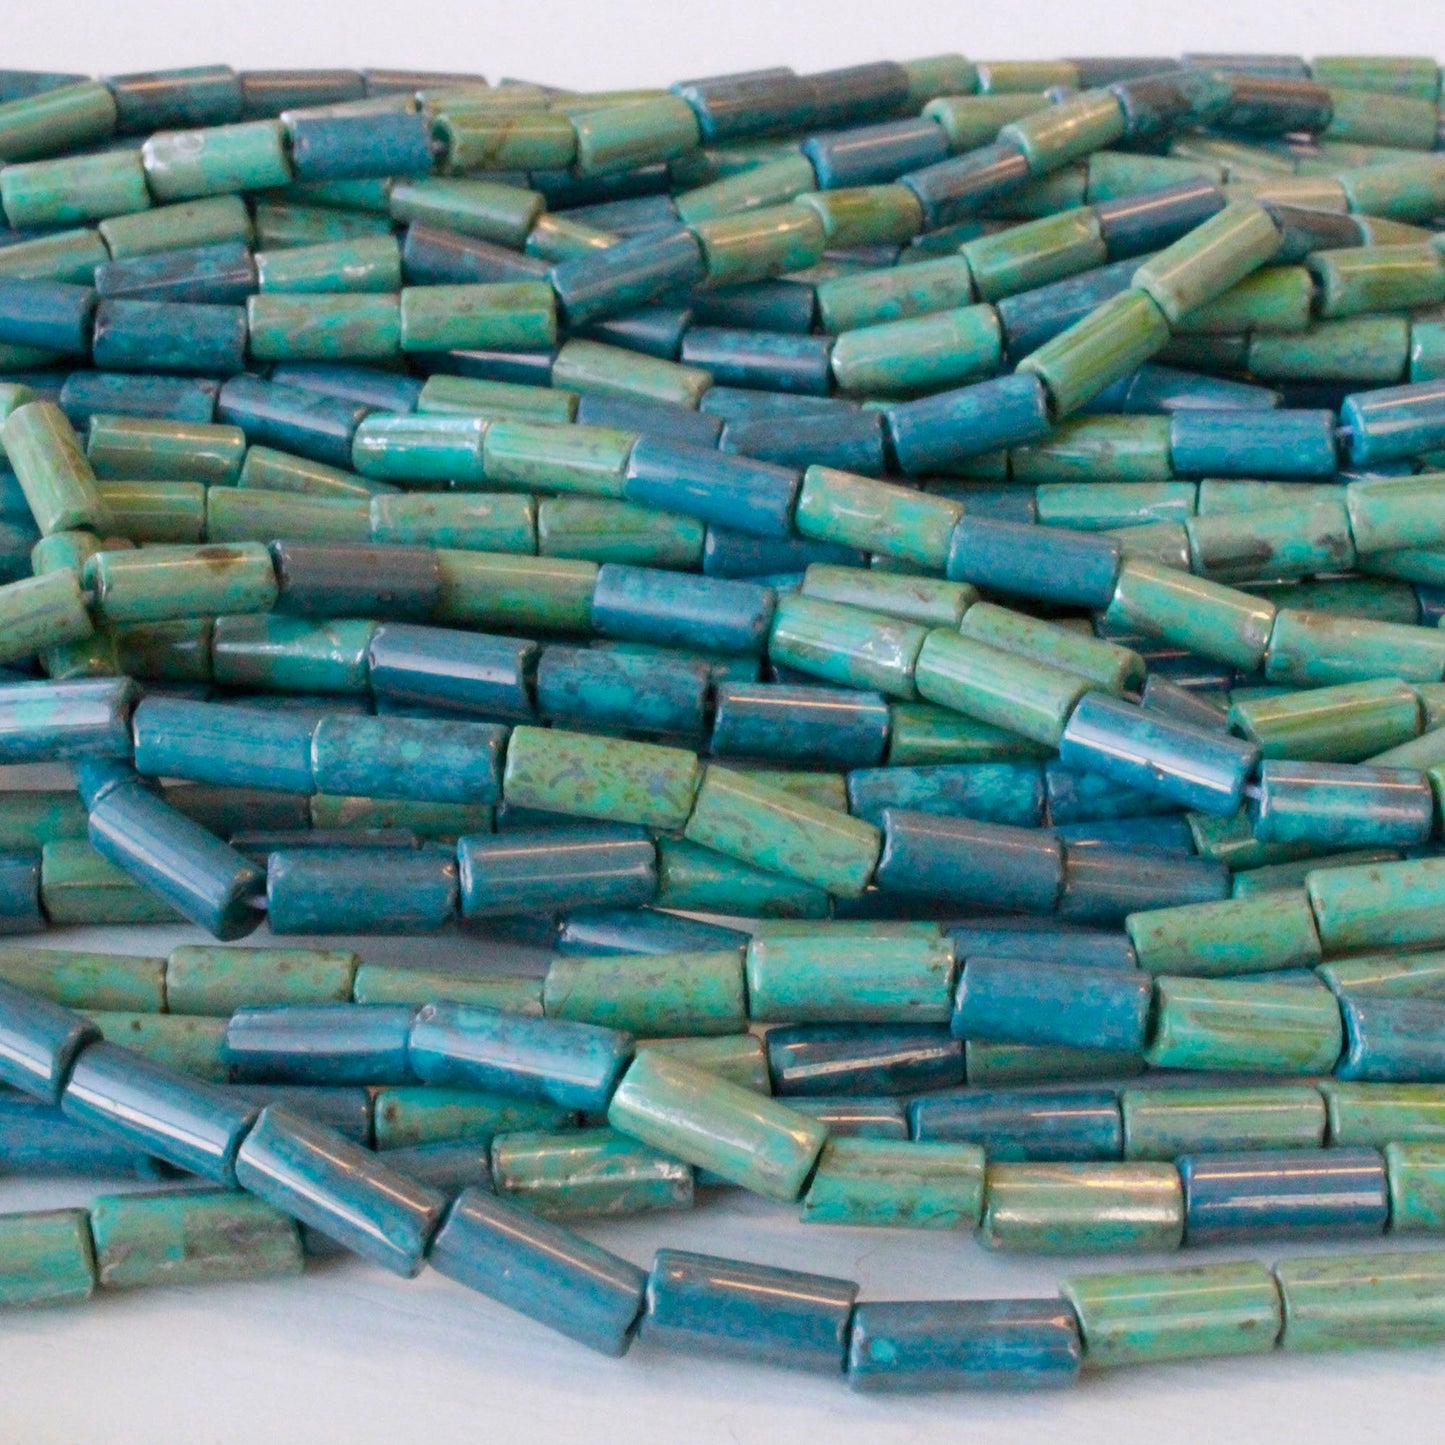 9x4mm Glass Tube Beads - Blue and Green - 20 or 60 Inches